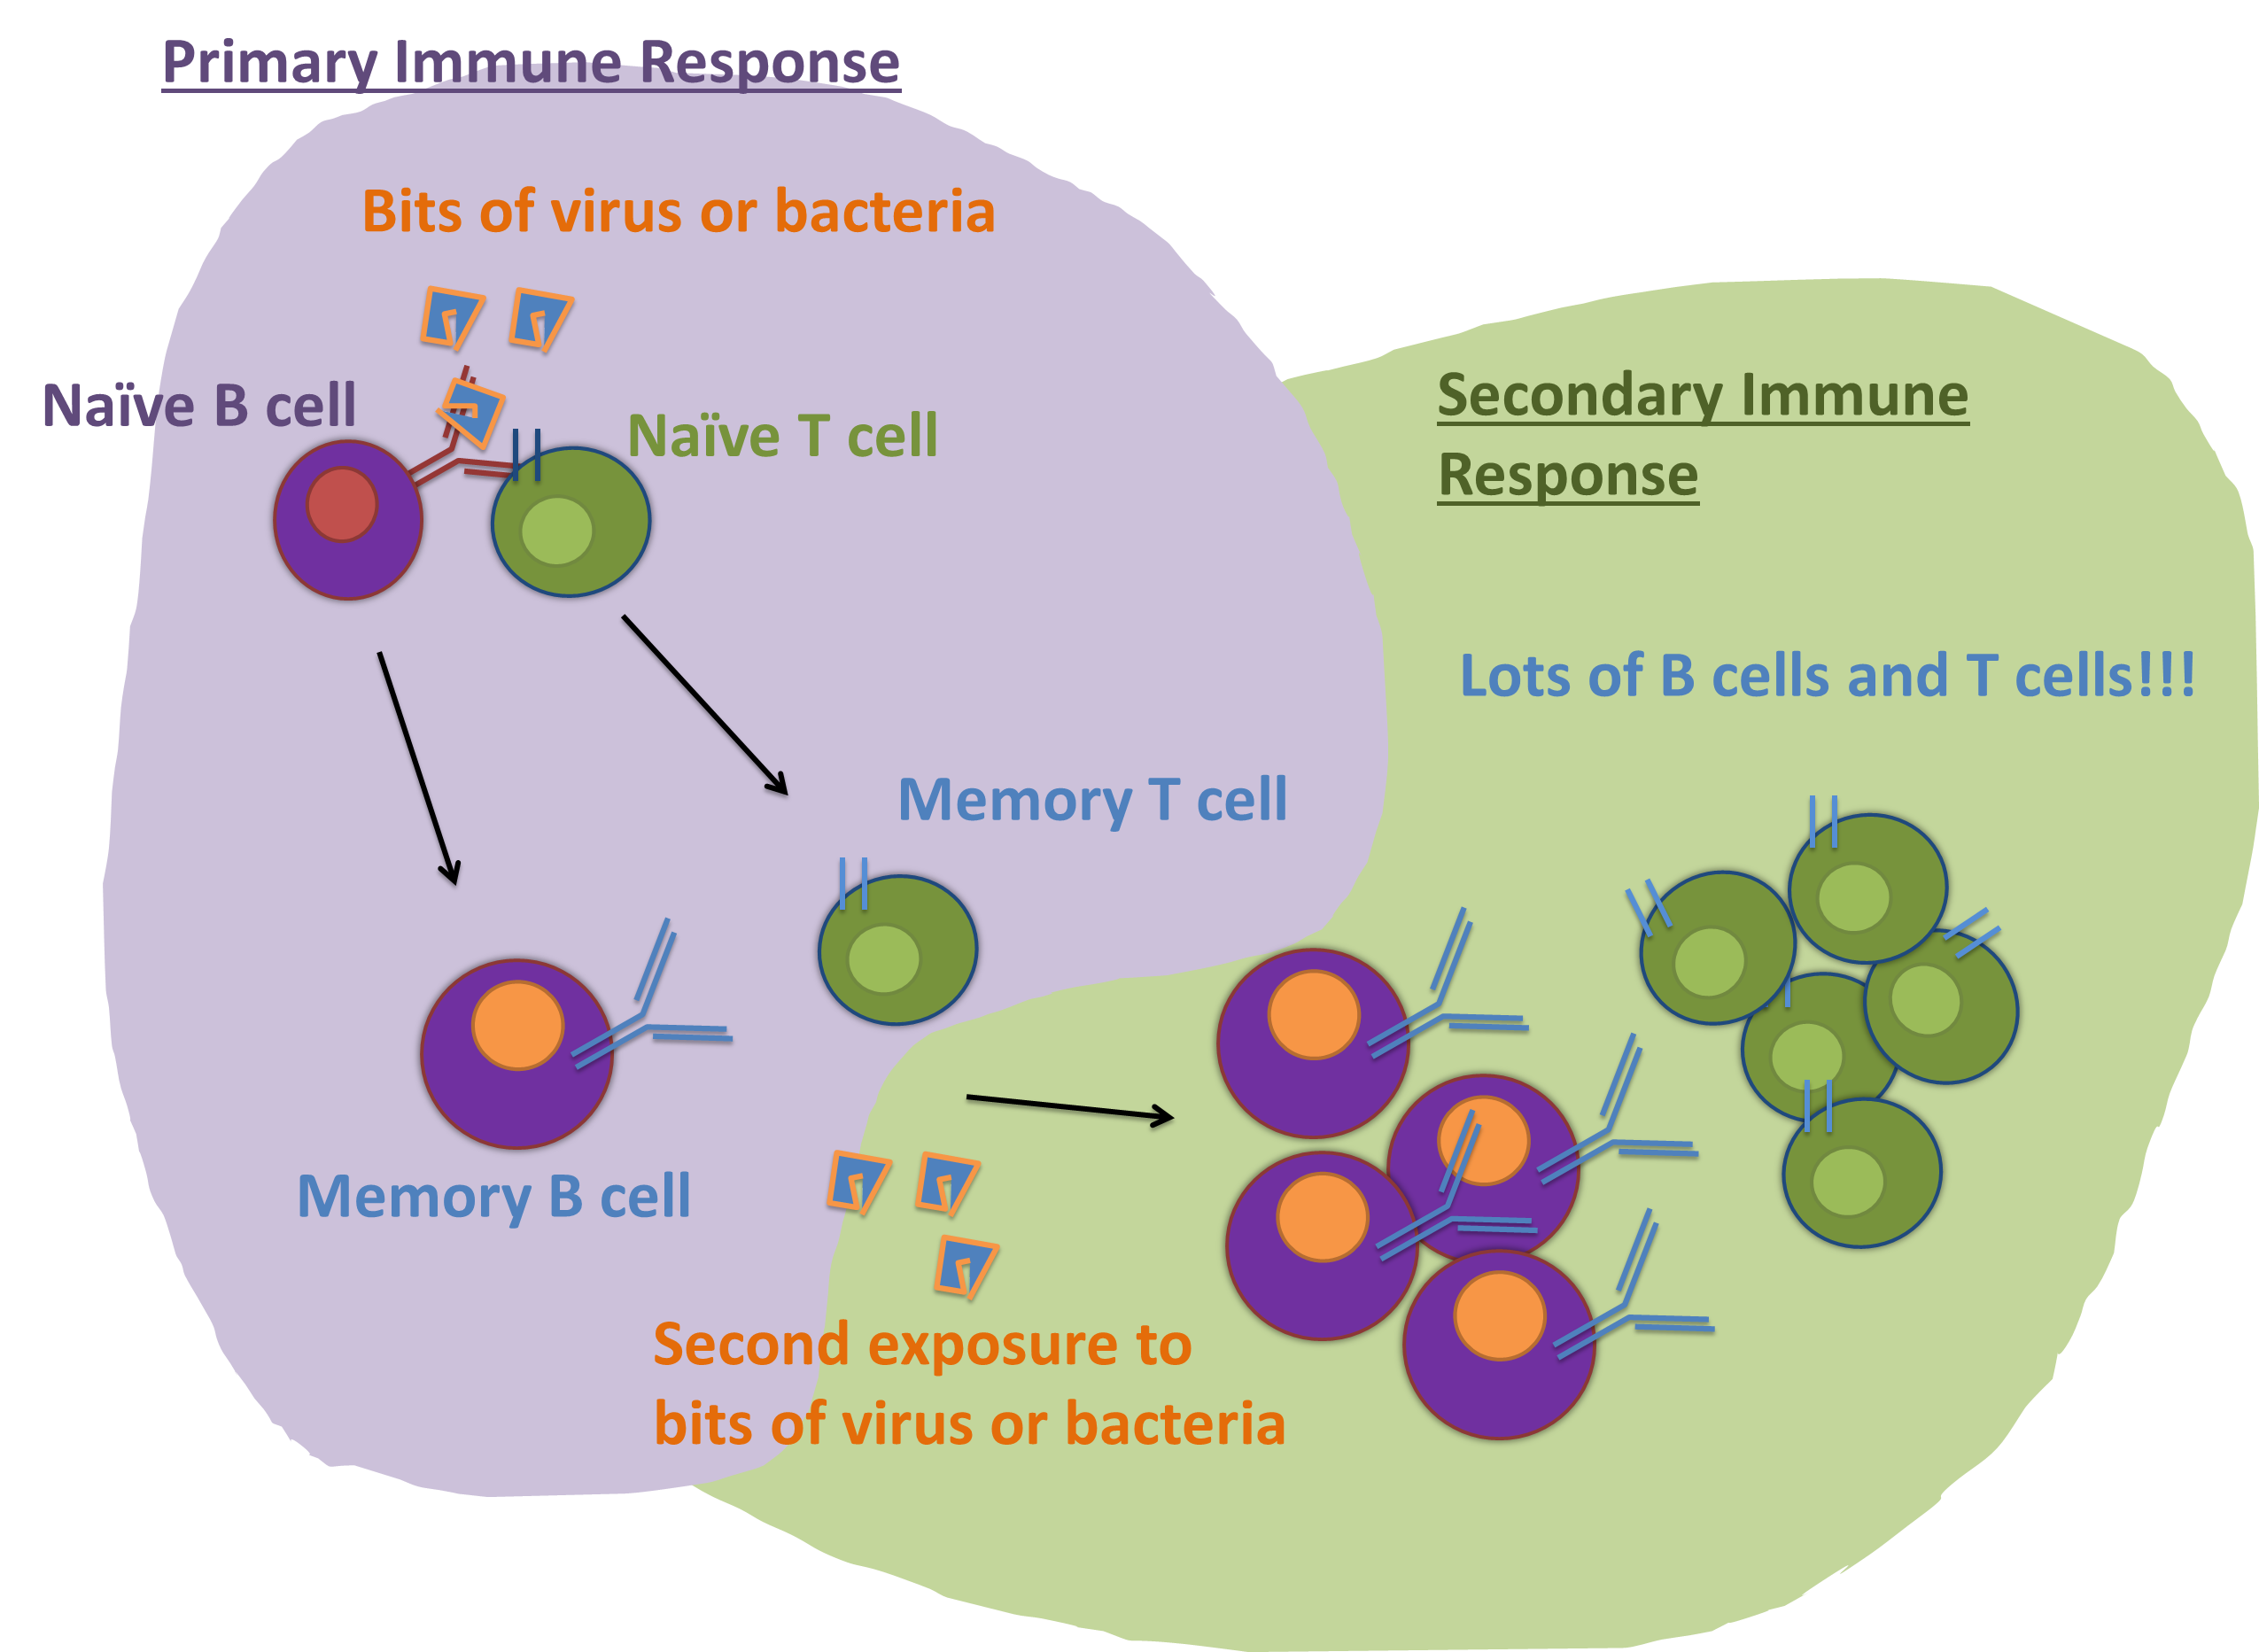 https://immyounology.wordpress.com/2013/10/23/getting-a-better-a-picture-of-human-immunology/